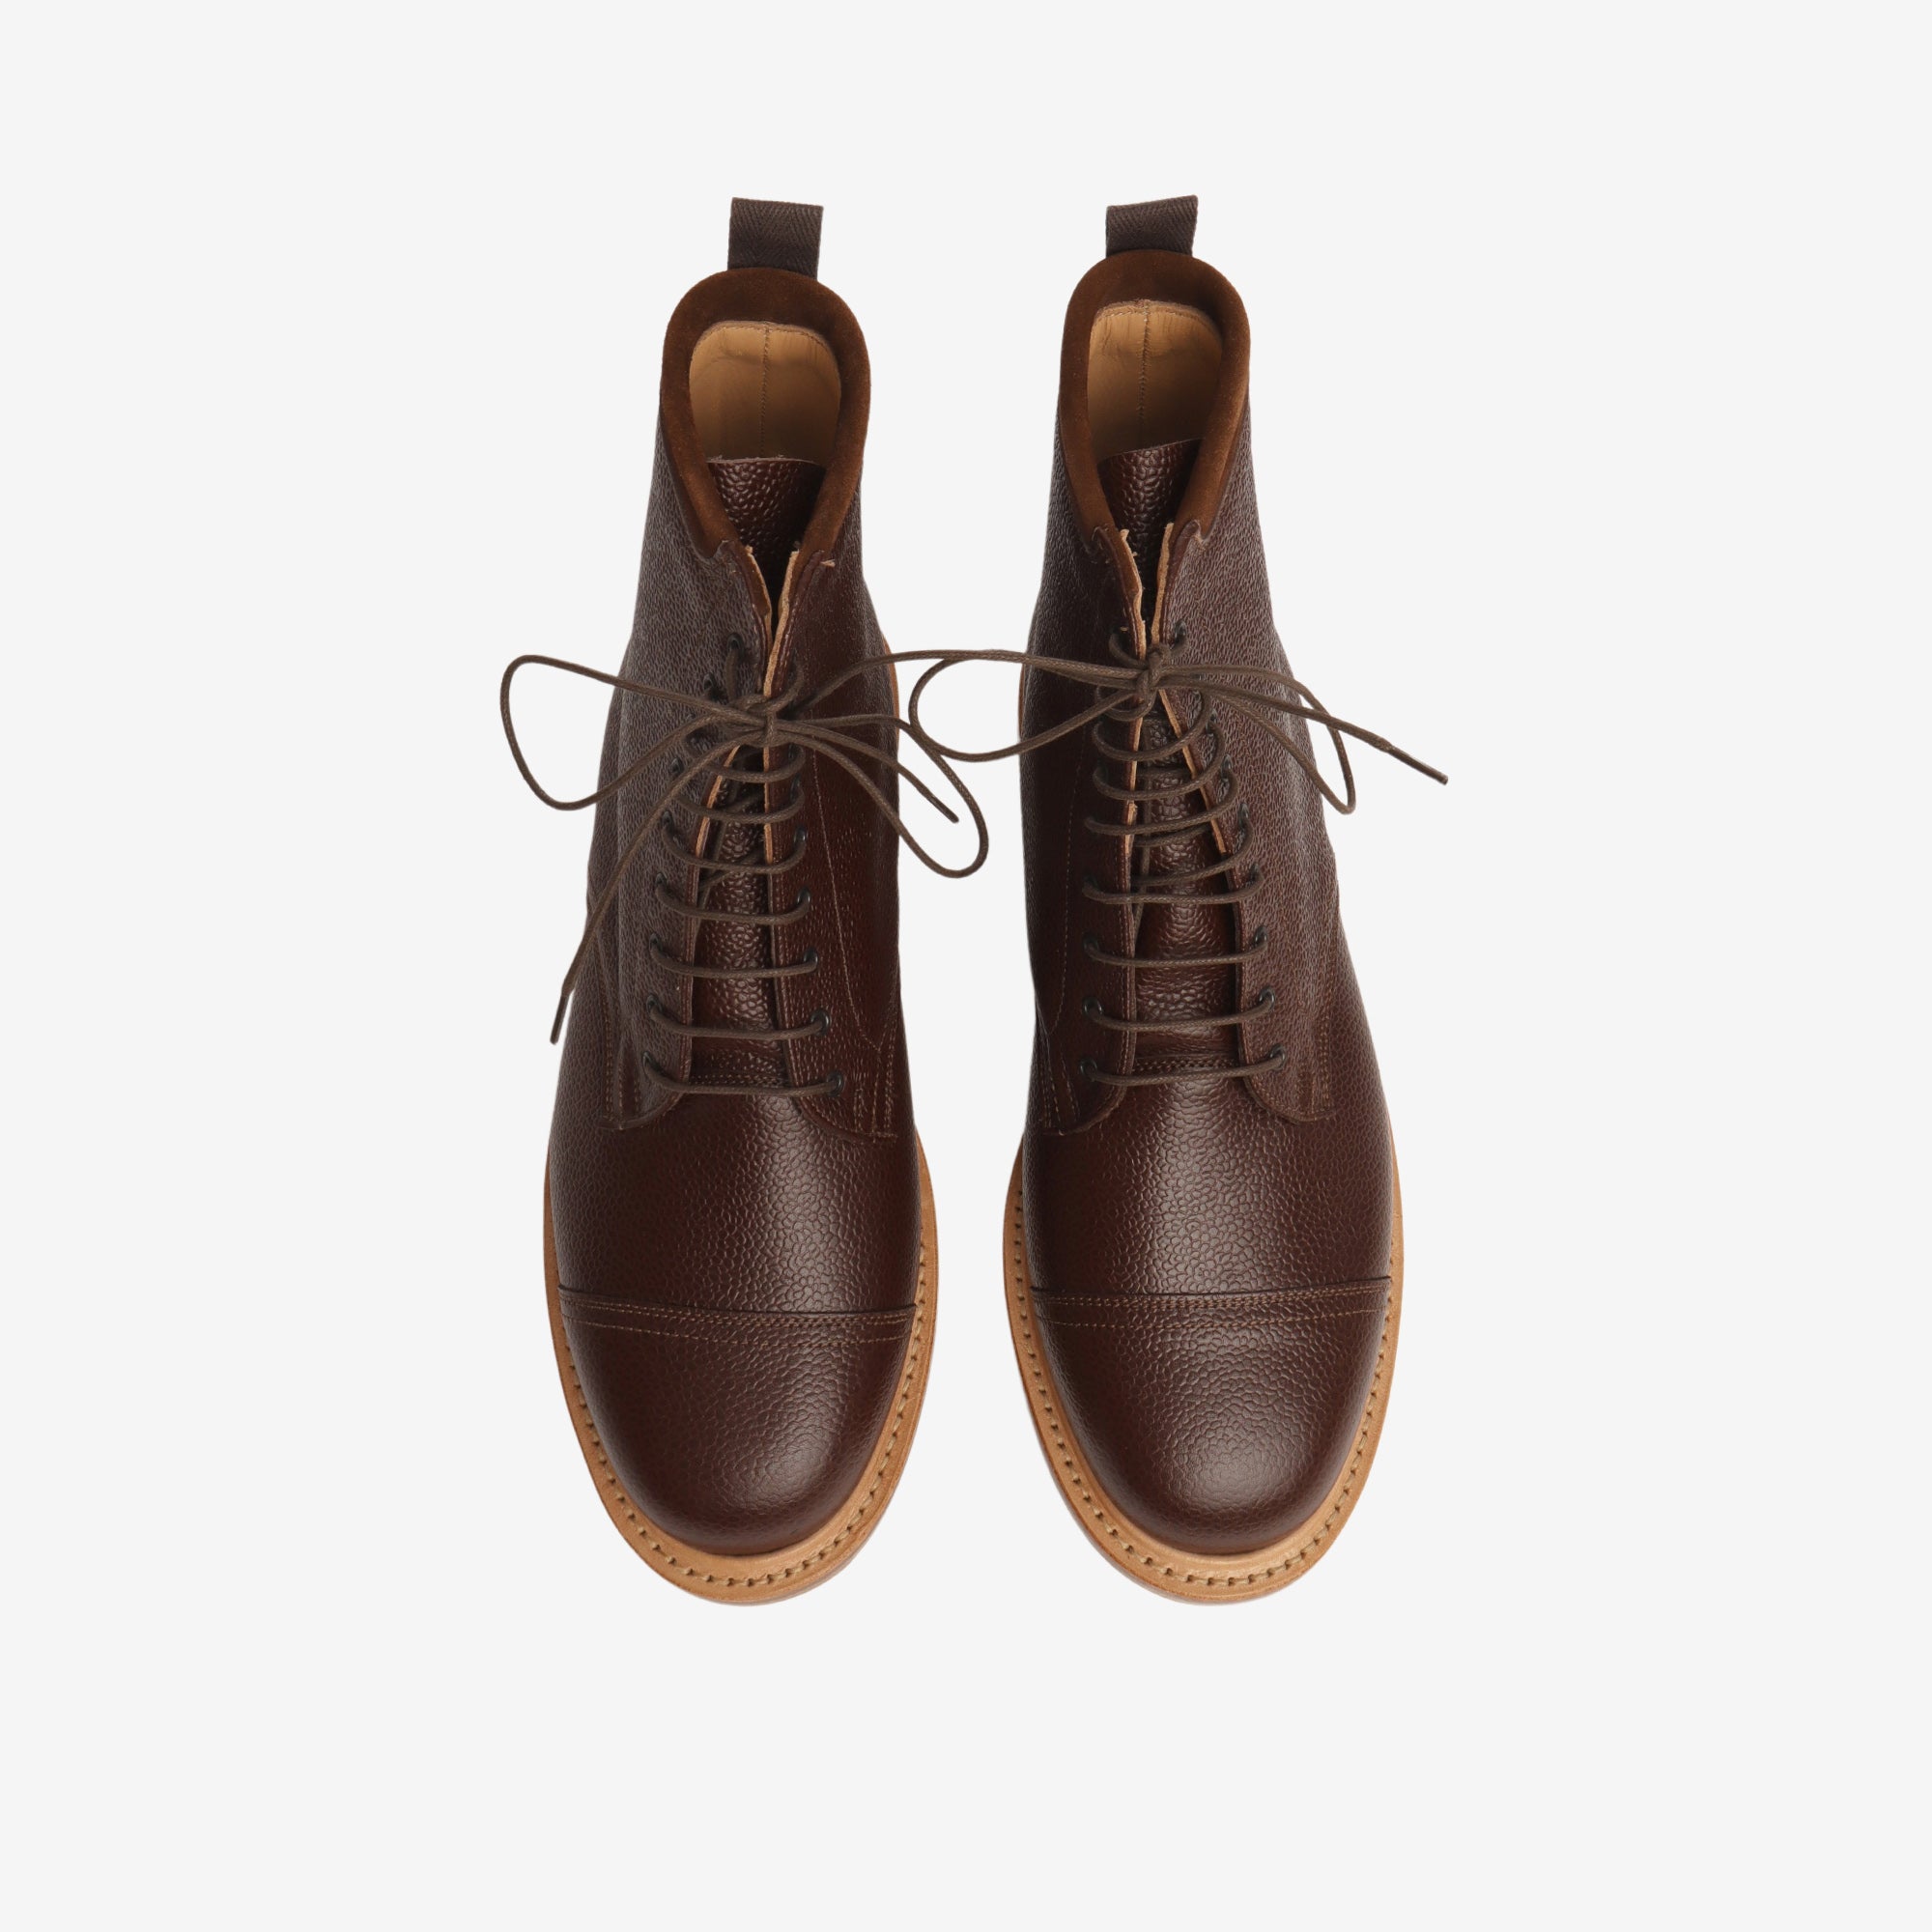 Craftmaster Leather Boot